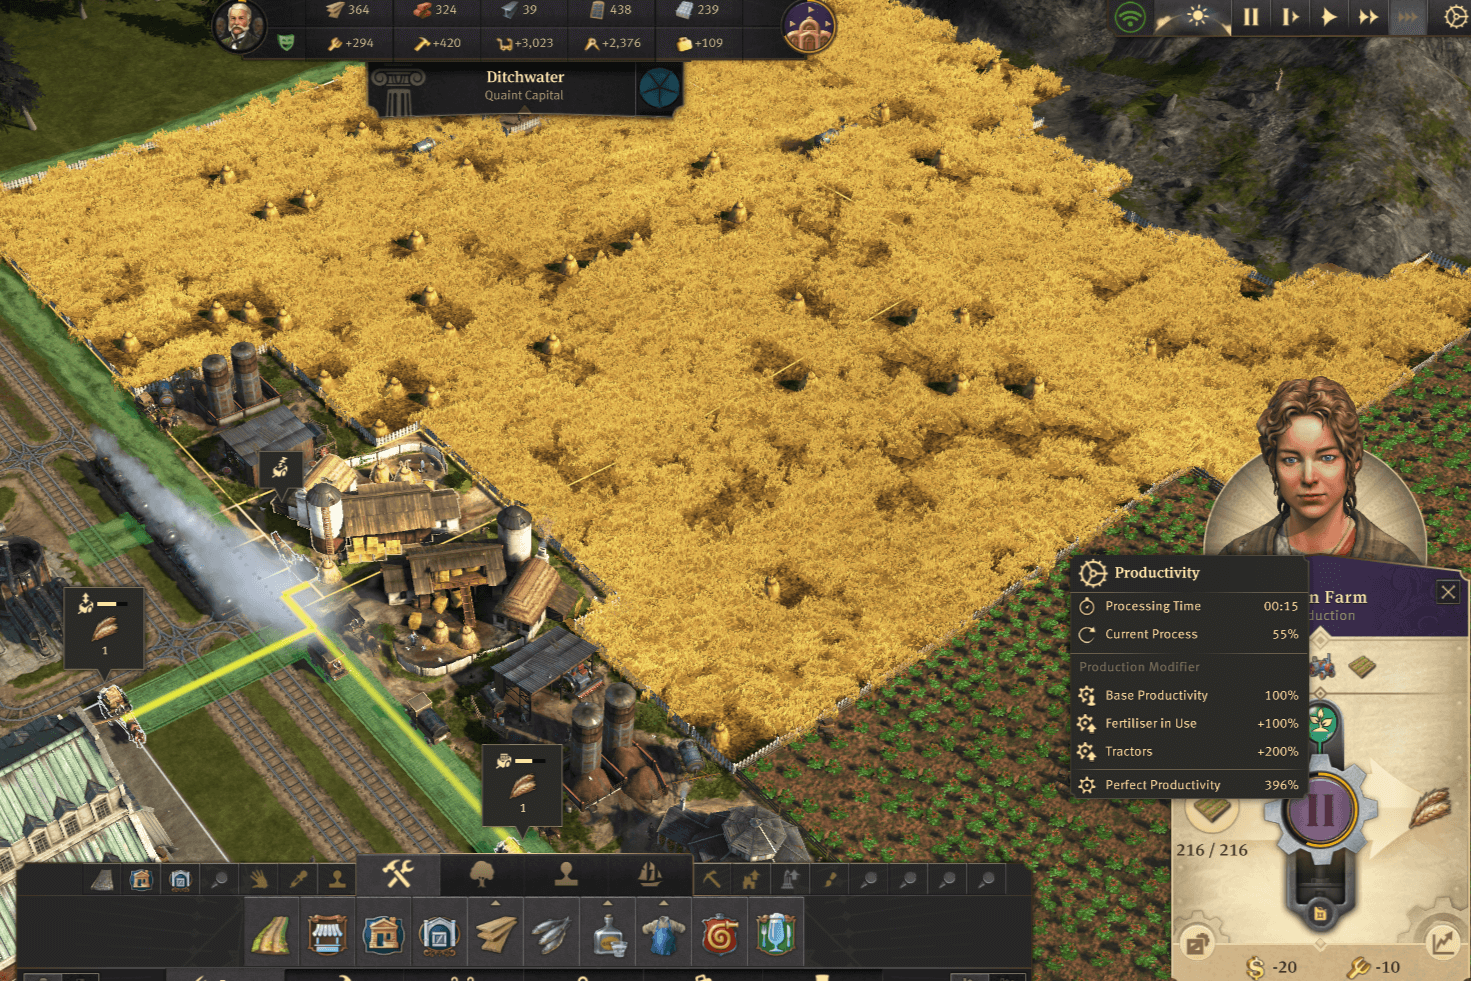 Grain Farm in the Old World with +300% productivity bonus due to active Fertilizer Silo and Tractor Barn.